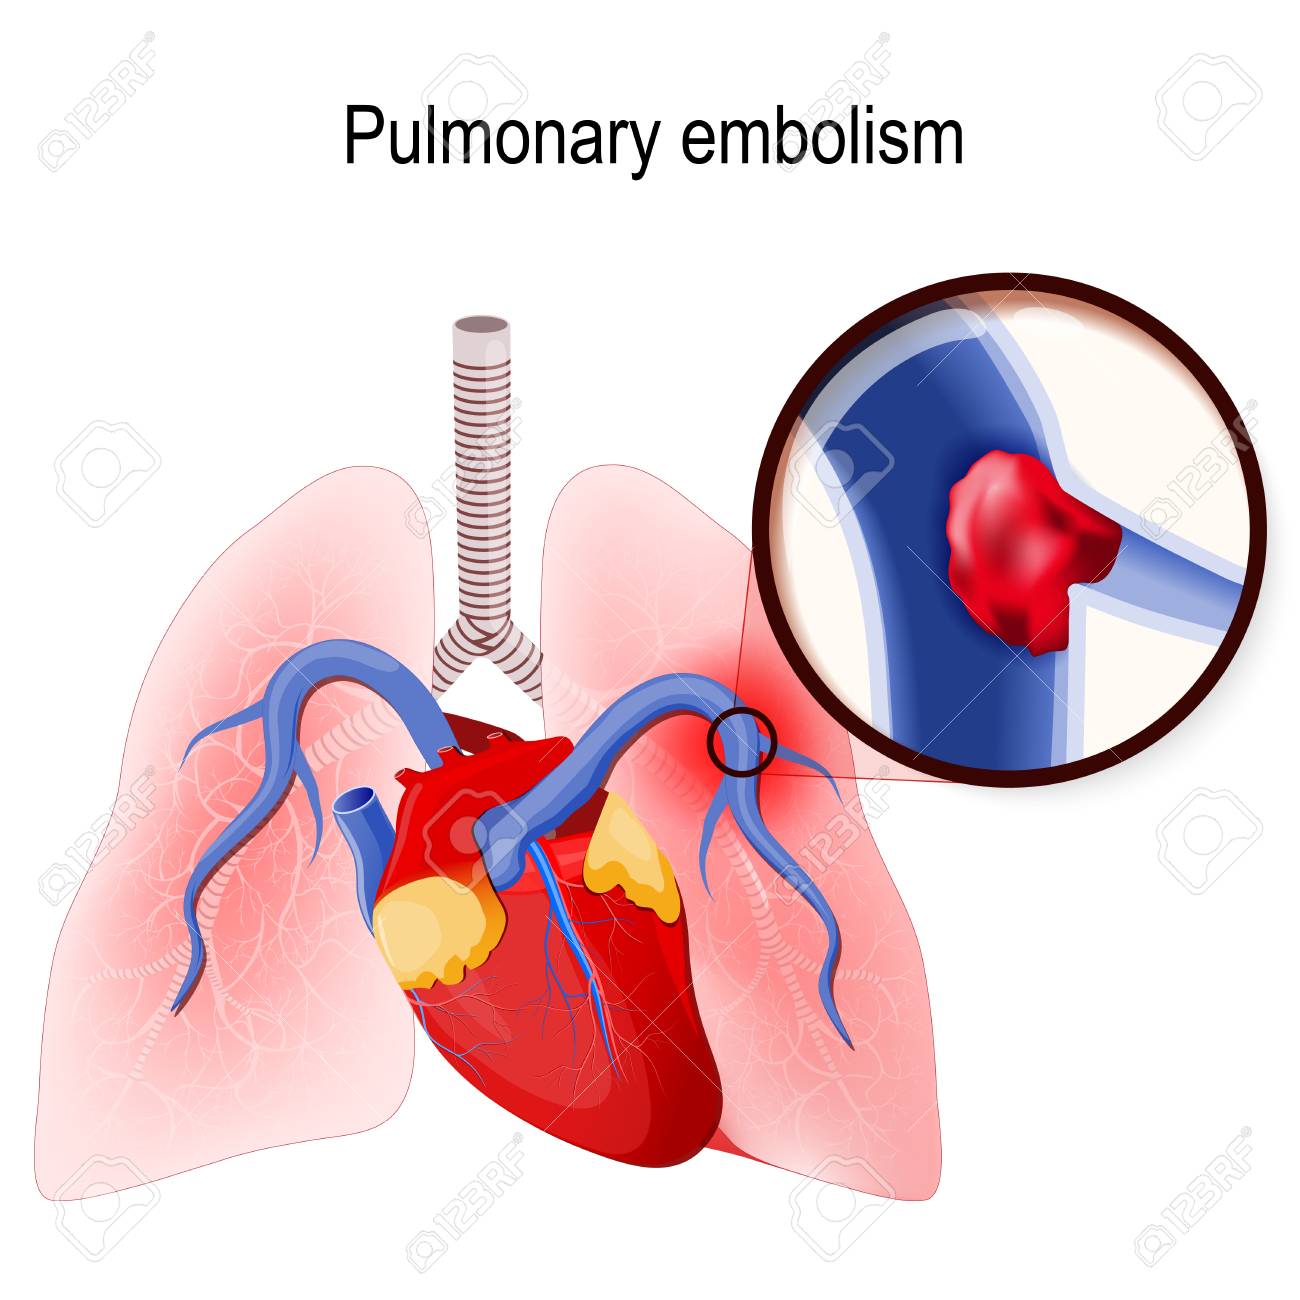 Pulmonary embolism. Blockage of the main artery of the lung or one of its branches by a blood clot that has travelled from elsewhere in the body through the bloodstream. Human lungs and heart. blood clot in the vein (close up)